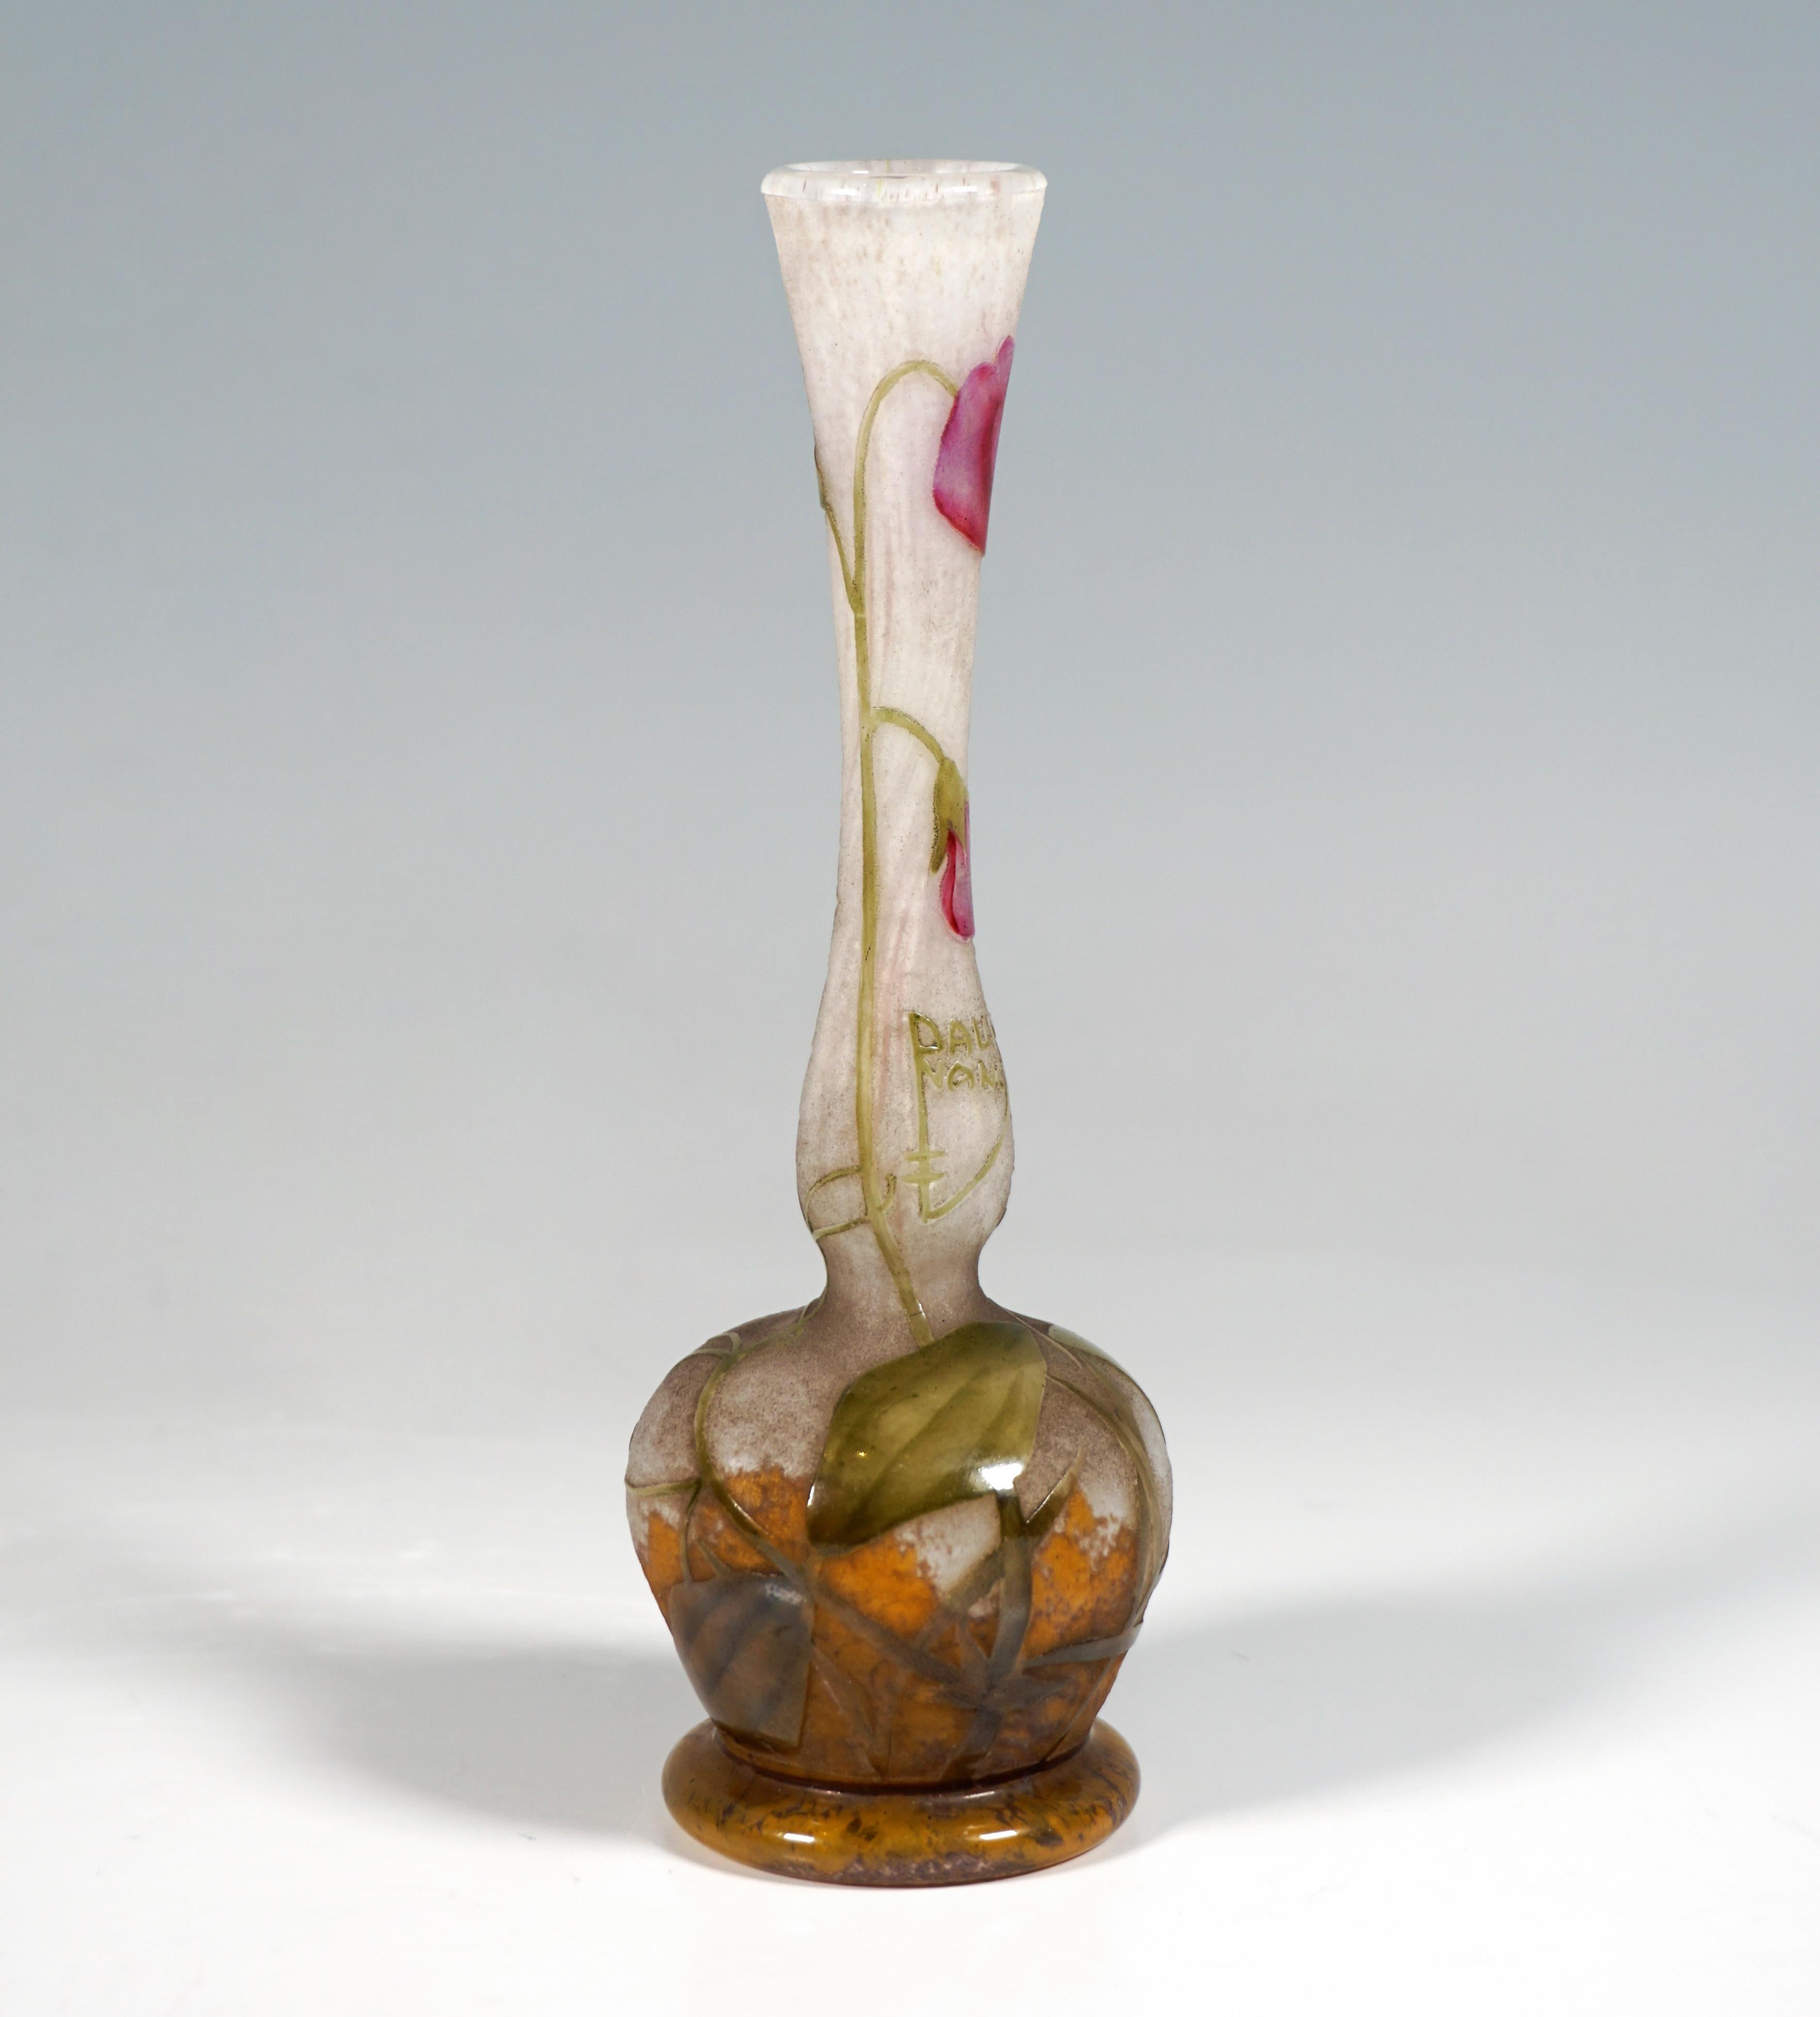 Delicate baluster vase with a bulbous body on a round base ring with a slender, long, curved and slightly widening neck, colorless glass with flaky white and grayish powder inclusions, in the base area with yellow-orange-brownish color powder